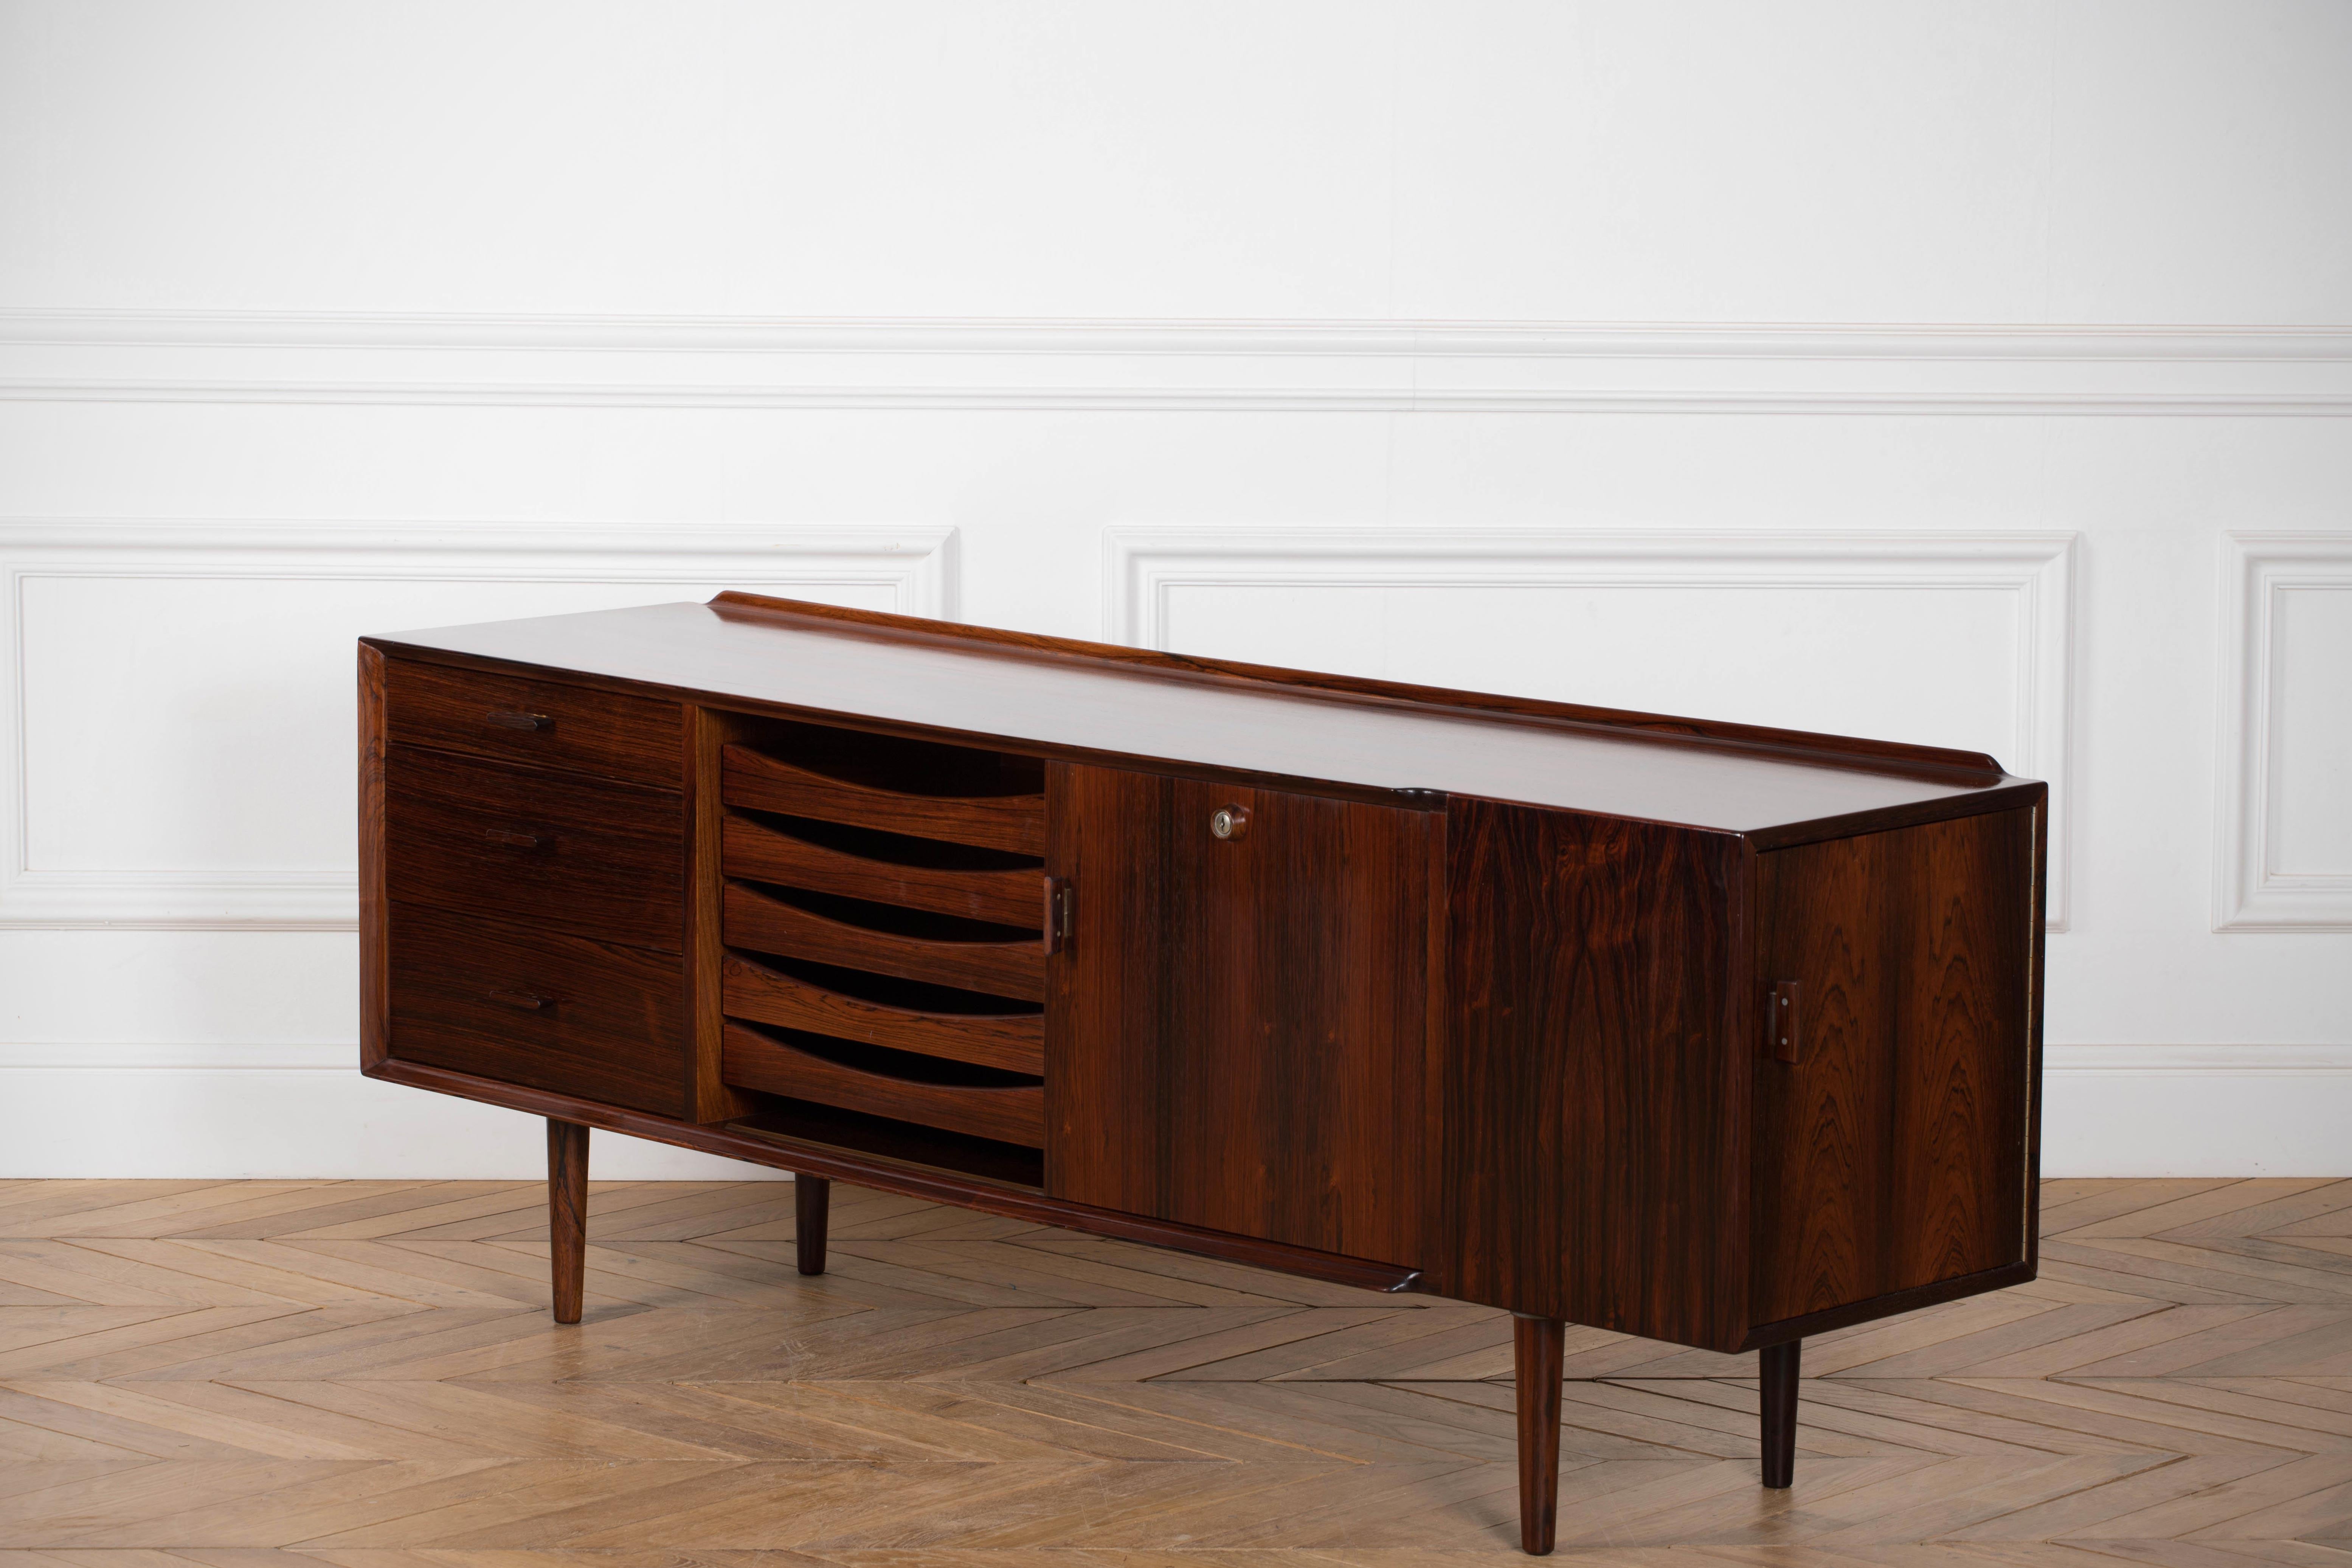 Particularly beautiful sideboard, designed by Danish designer Arne Vodder for Sibast, Denmark in the 60's. The sideboard is made of tropical hardwood and has a very nice pattern in the woodgrain. The sideboard has a sliding doors hidding either one